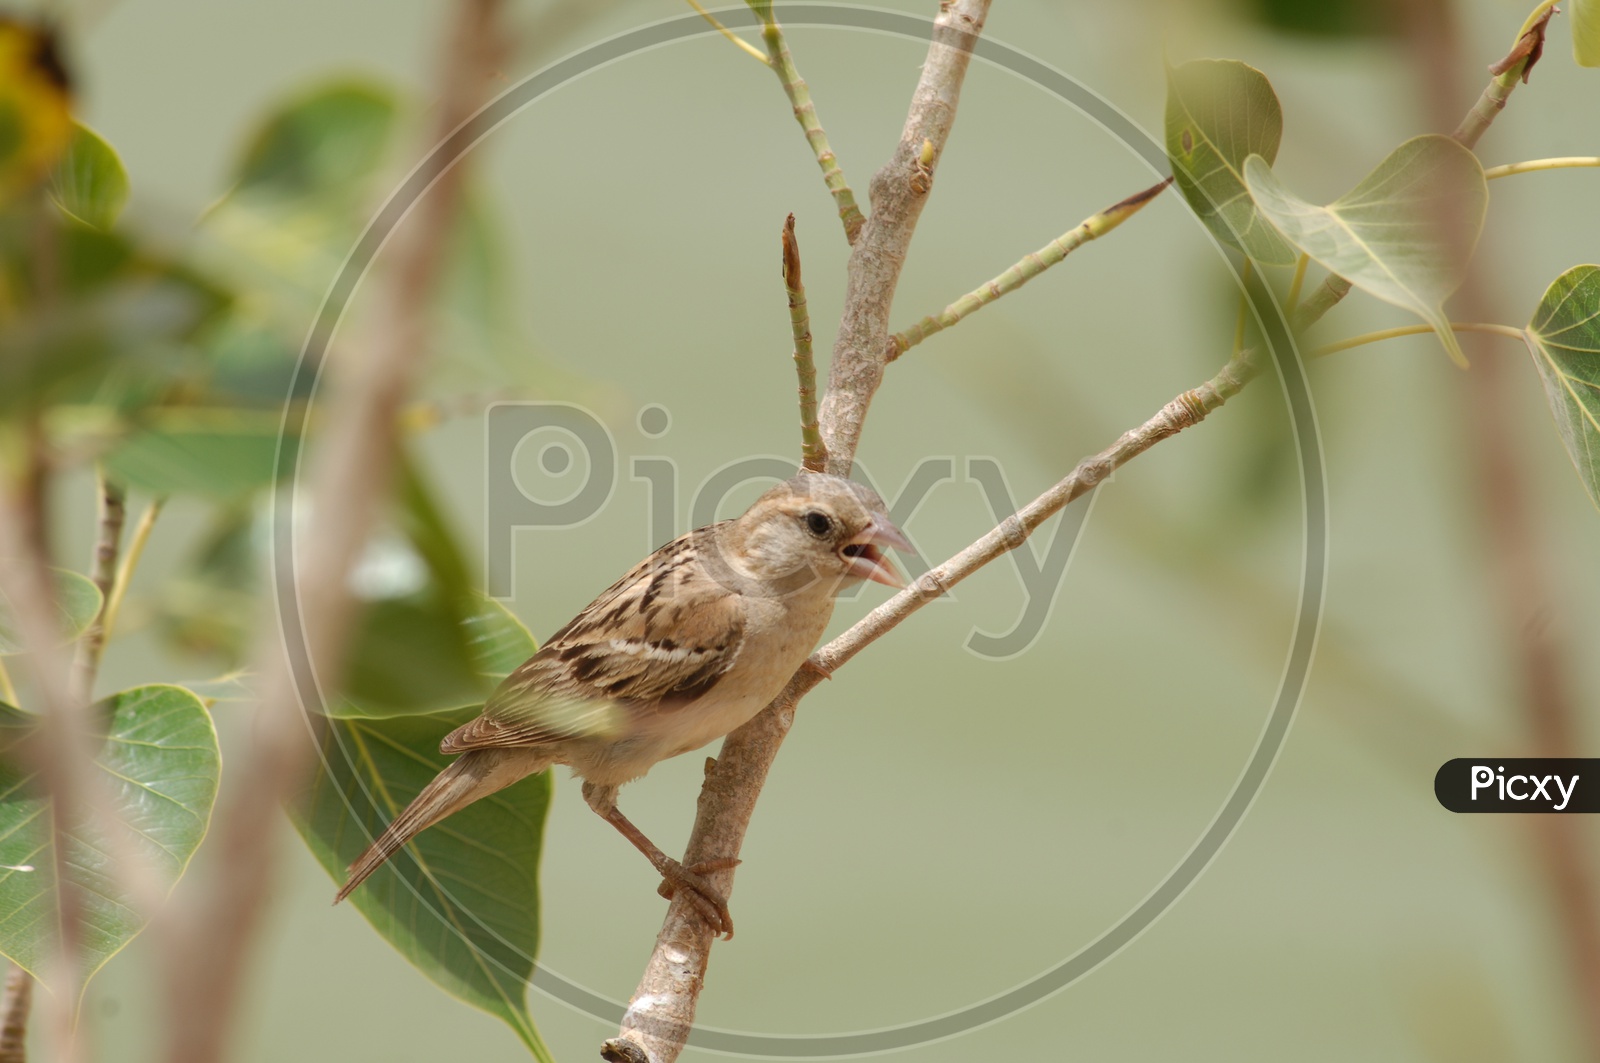 A house sparrow on the branch